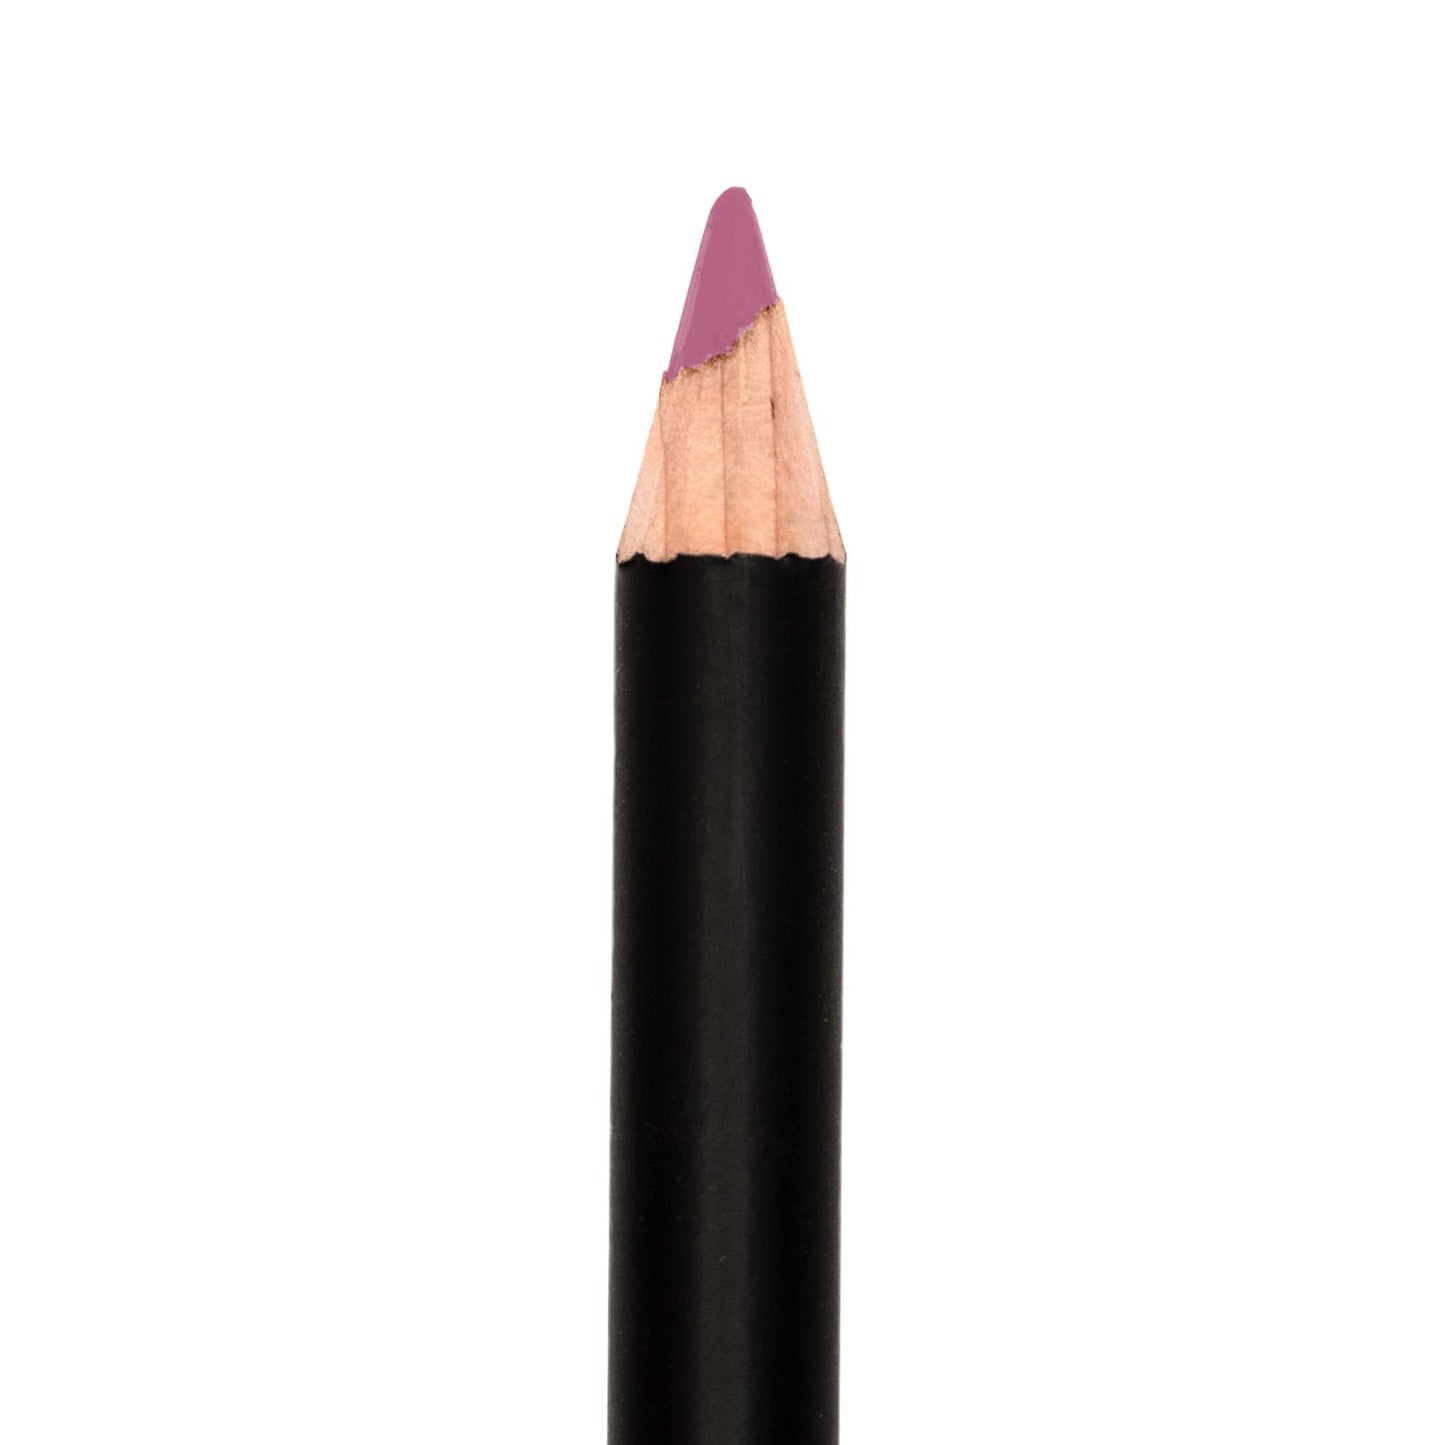 Achieve a dreamy, pillowy lip look with ease using Cruisin Organics' Sweet Spice Lip Pencil. Infused with shea butter, this long-lasting, no-smudge formula will give you fuller, plumper lips. Our pencil provides a smooth and creamy base for your lipstick, helping you achieve the perfect look.